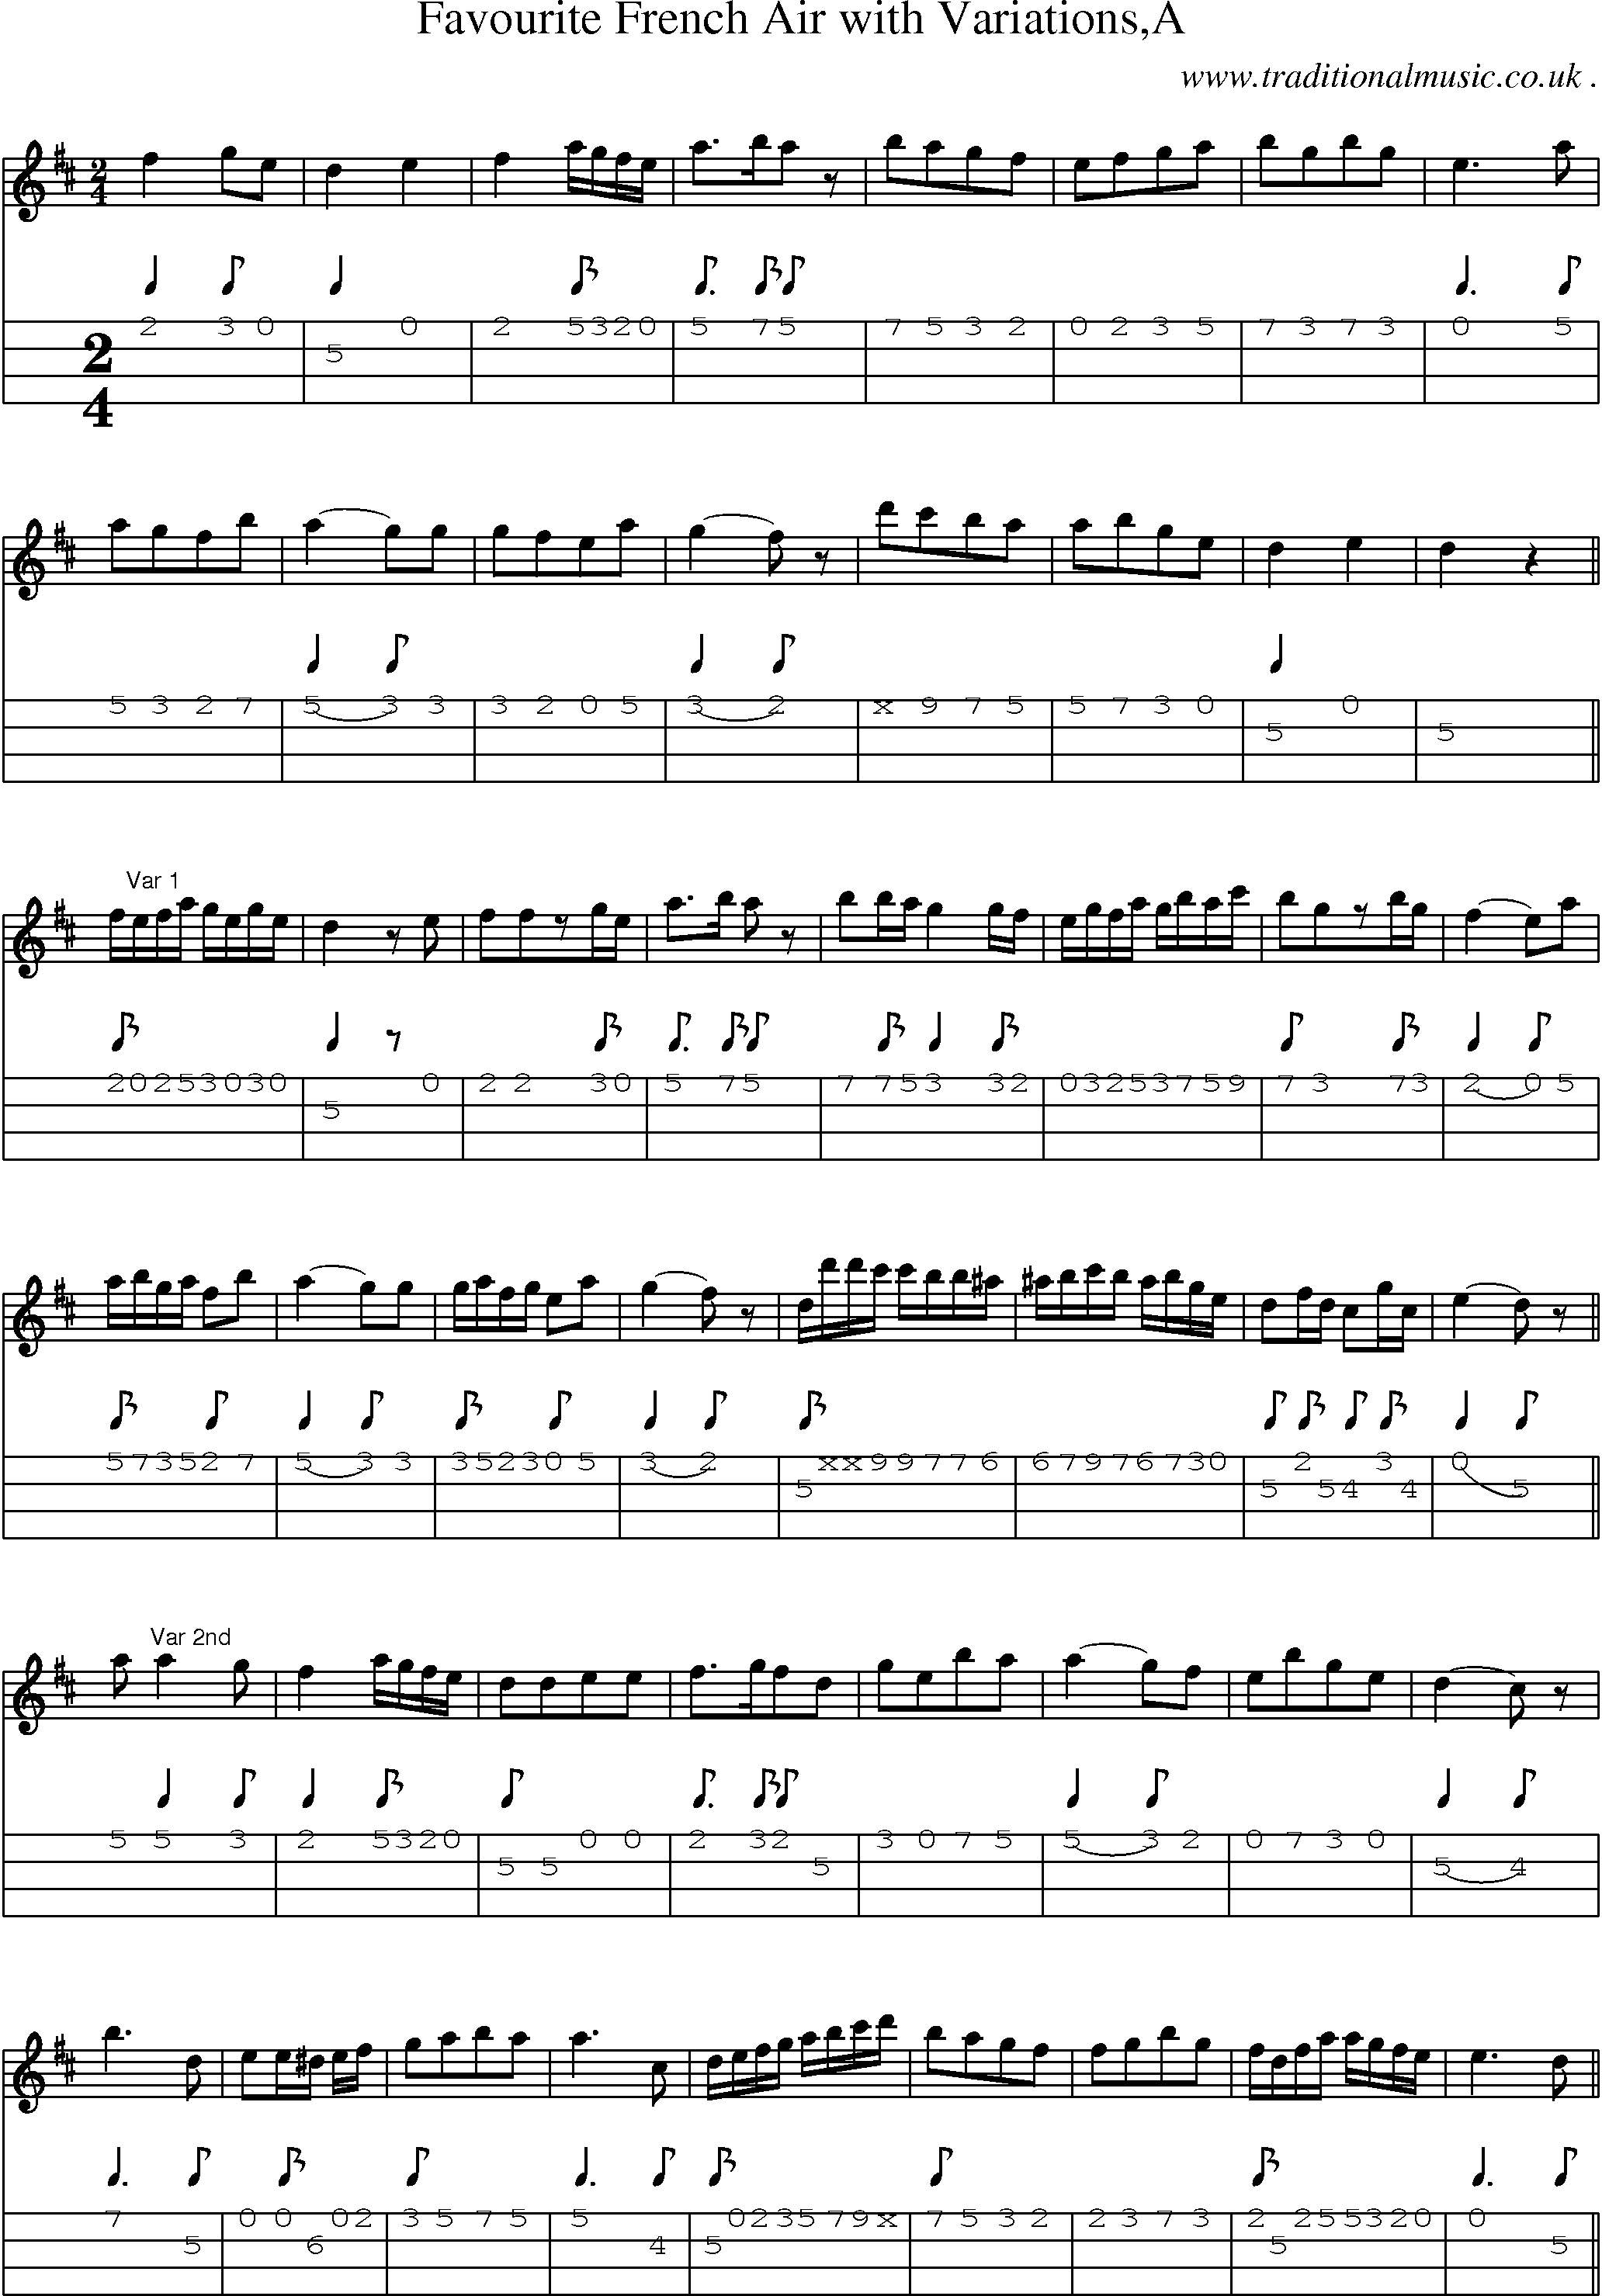 Sheet-Music and Mandolin Tabs for Favourite French Air With Variationsa